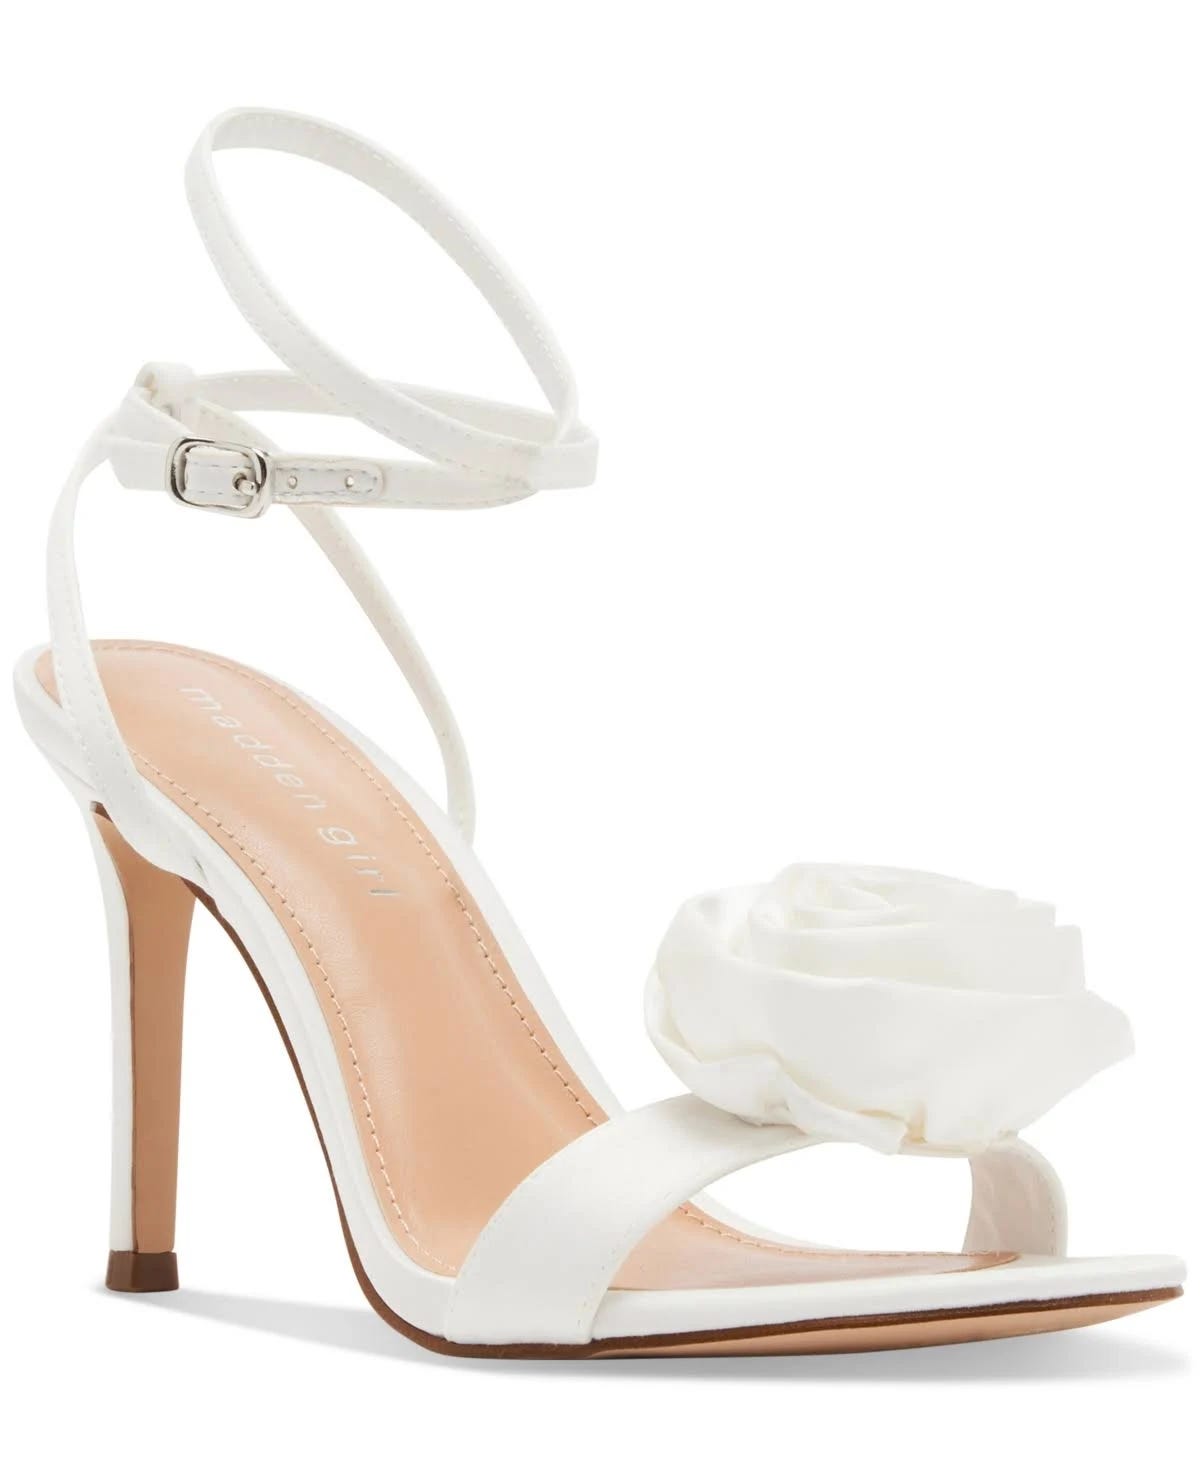 Madden Girl Blooming White Dress Nude Stiletto Heel Shoes: Comfortable, Stylish, and Affordable | Image